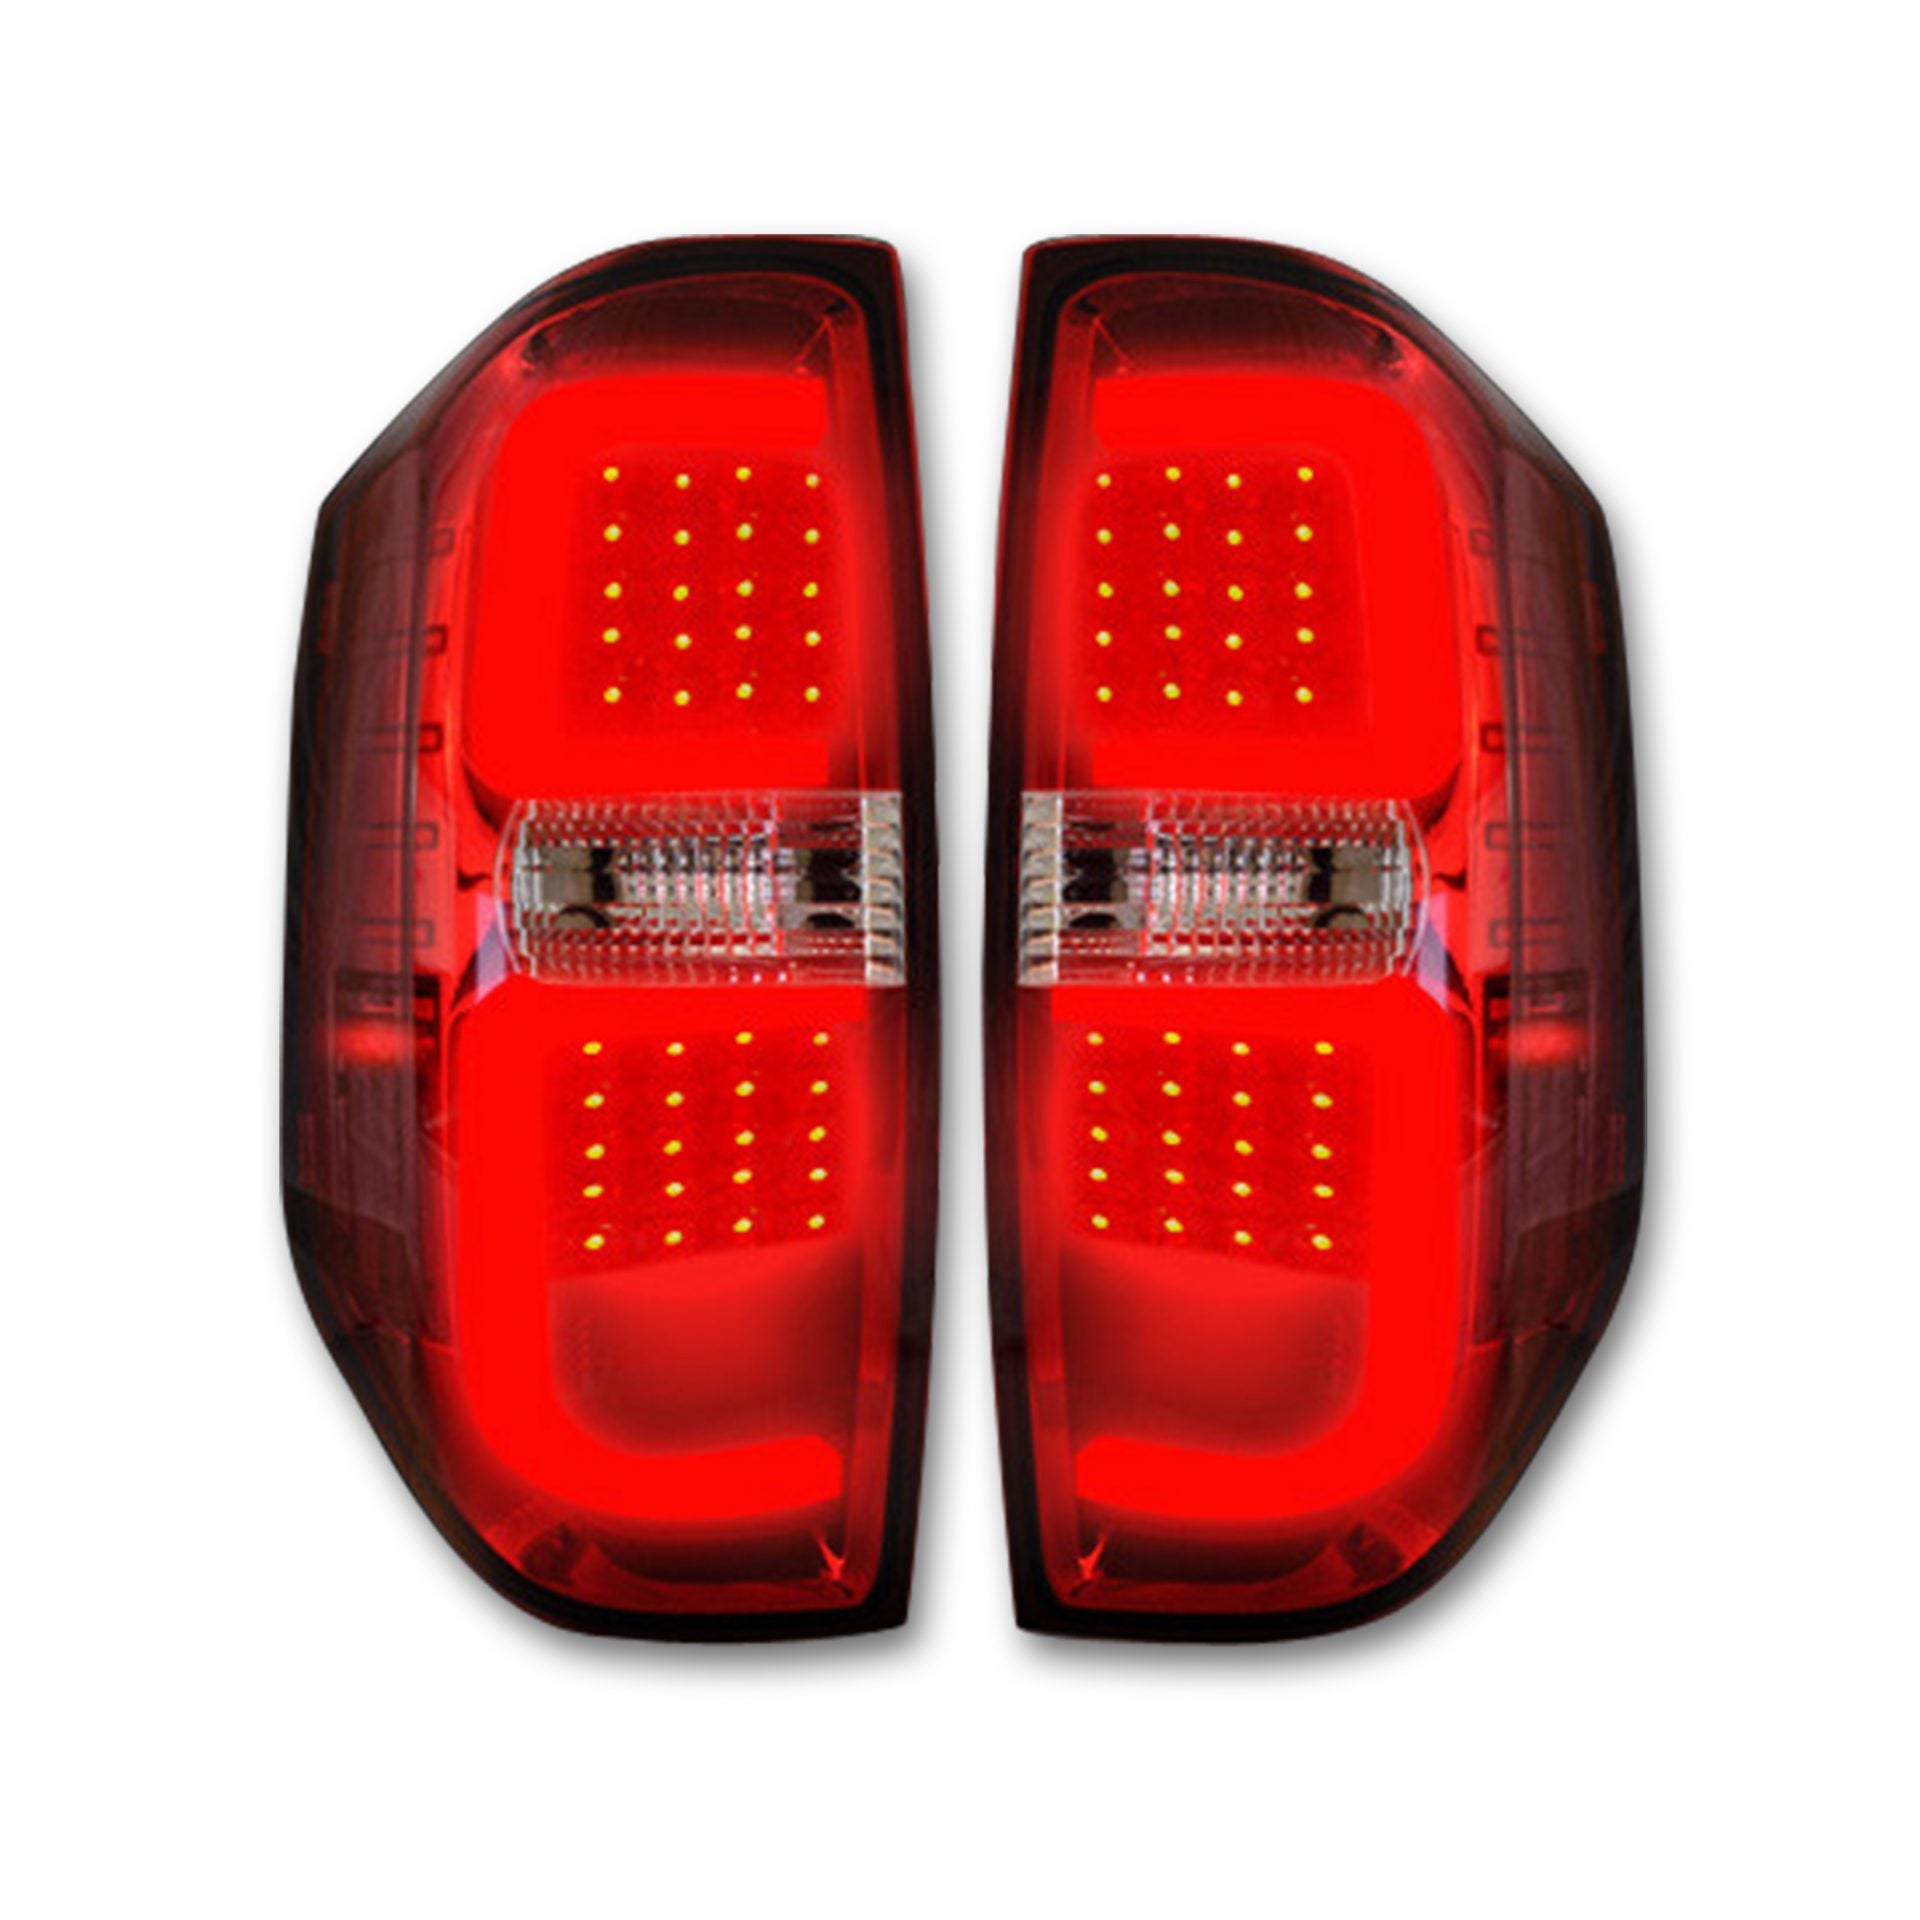 Toyota Tundra 14-19 LED Taillights - Red Lens